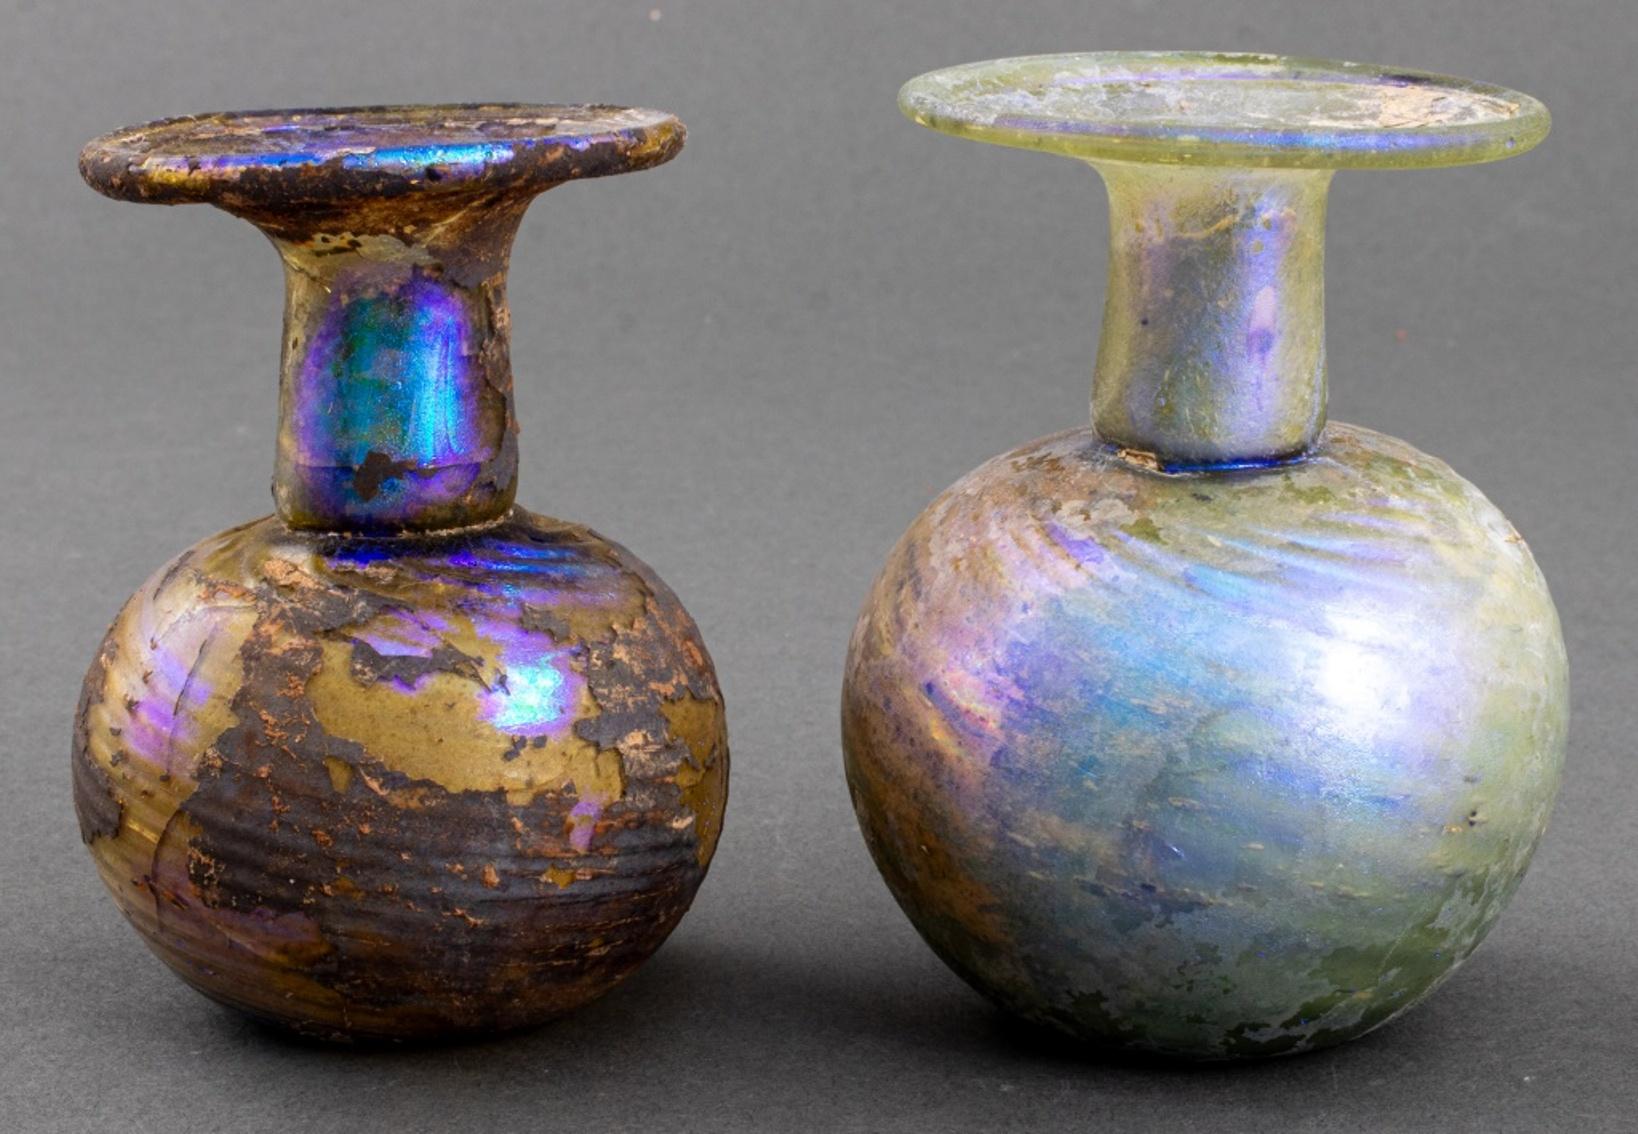 18th Century and Earlier Ancient Roman Glass Ampullae or Ball Flasks, Set of Two